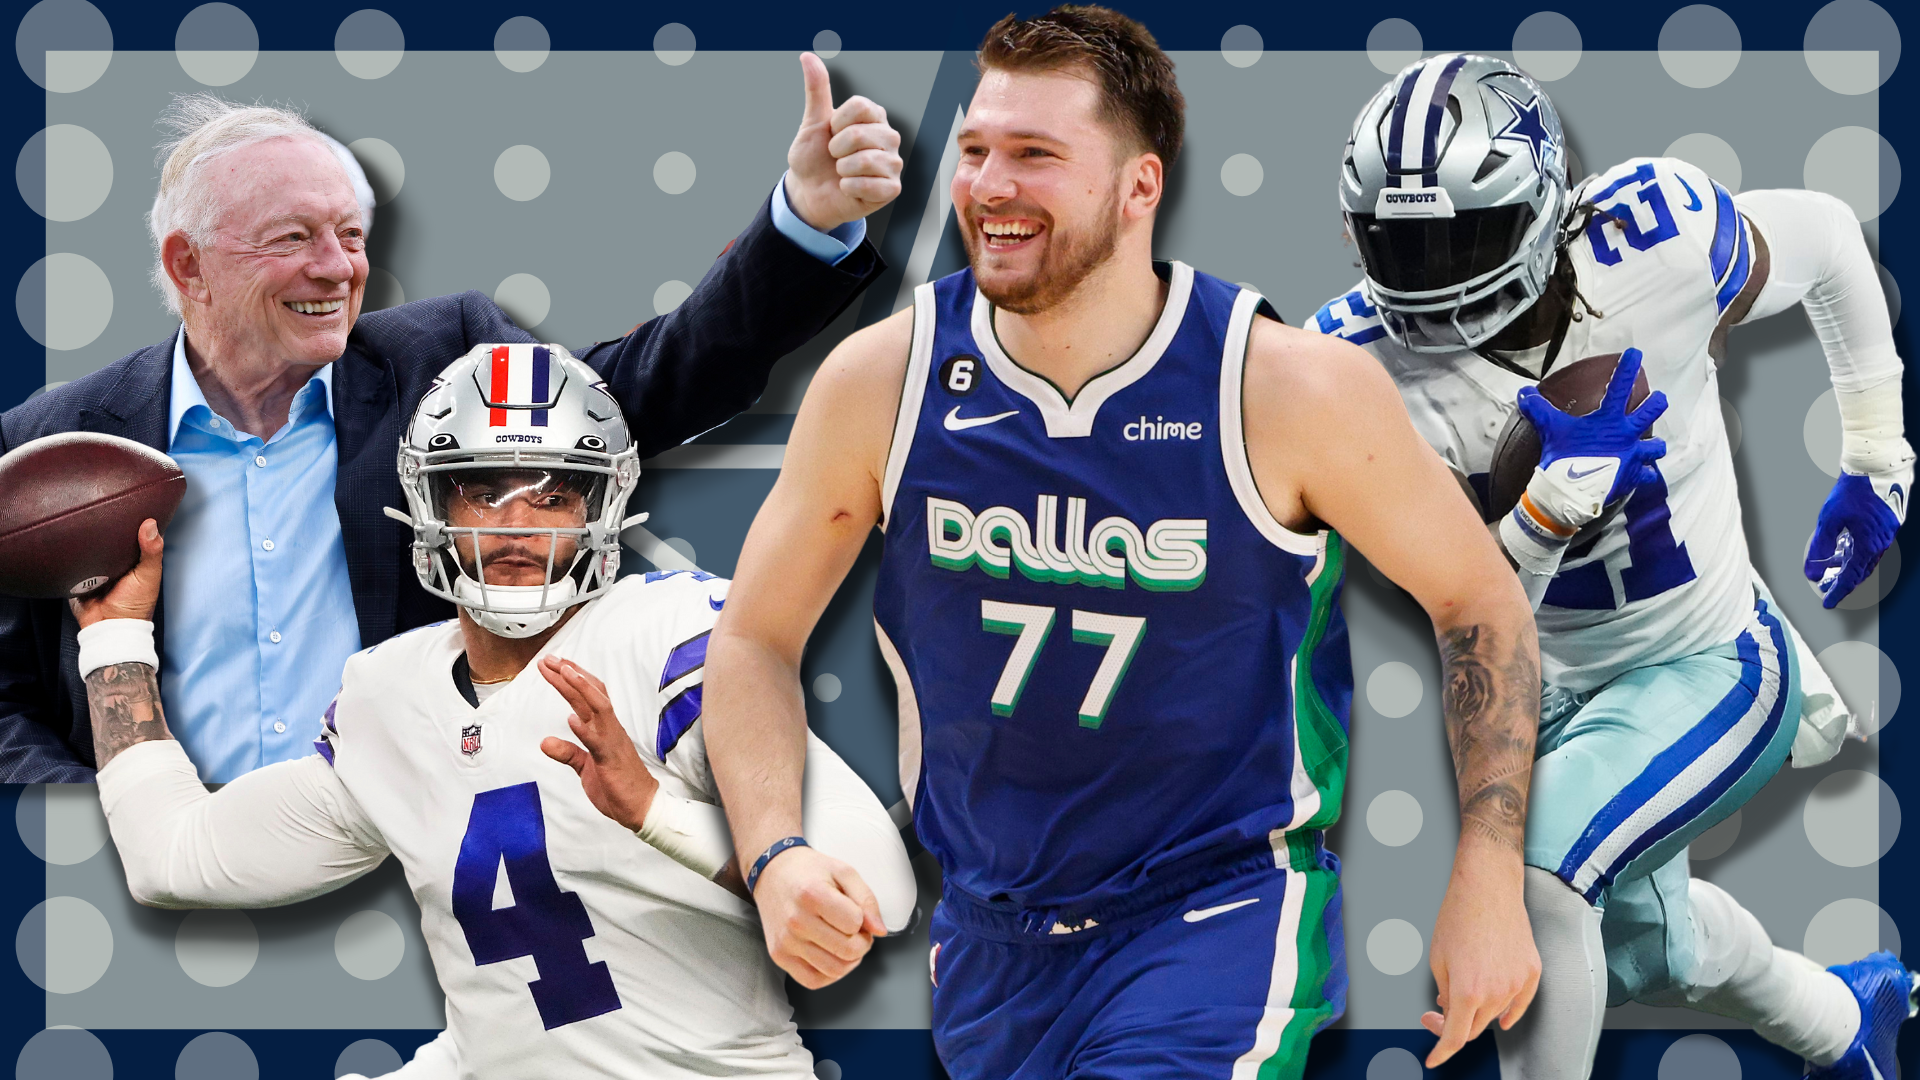 Luka Doncic Rising Stars – Jersey Crate